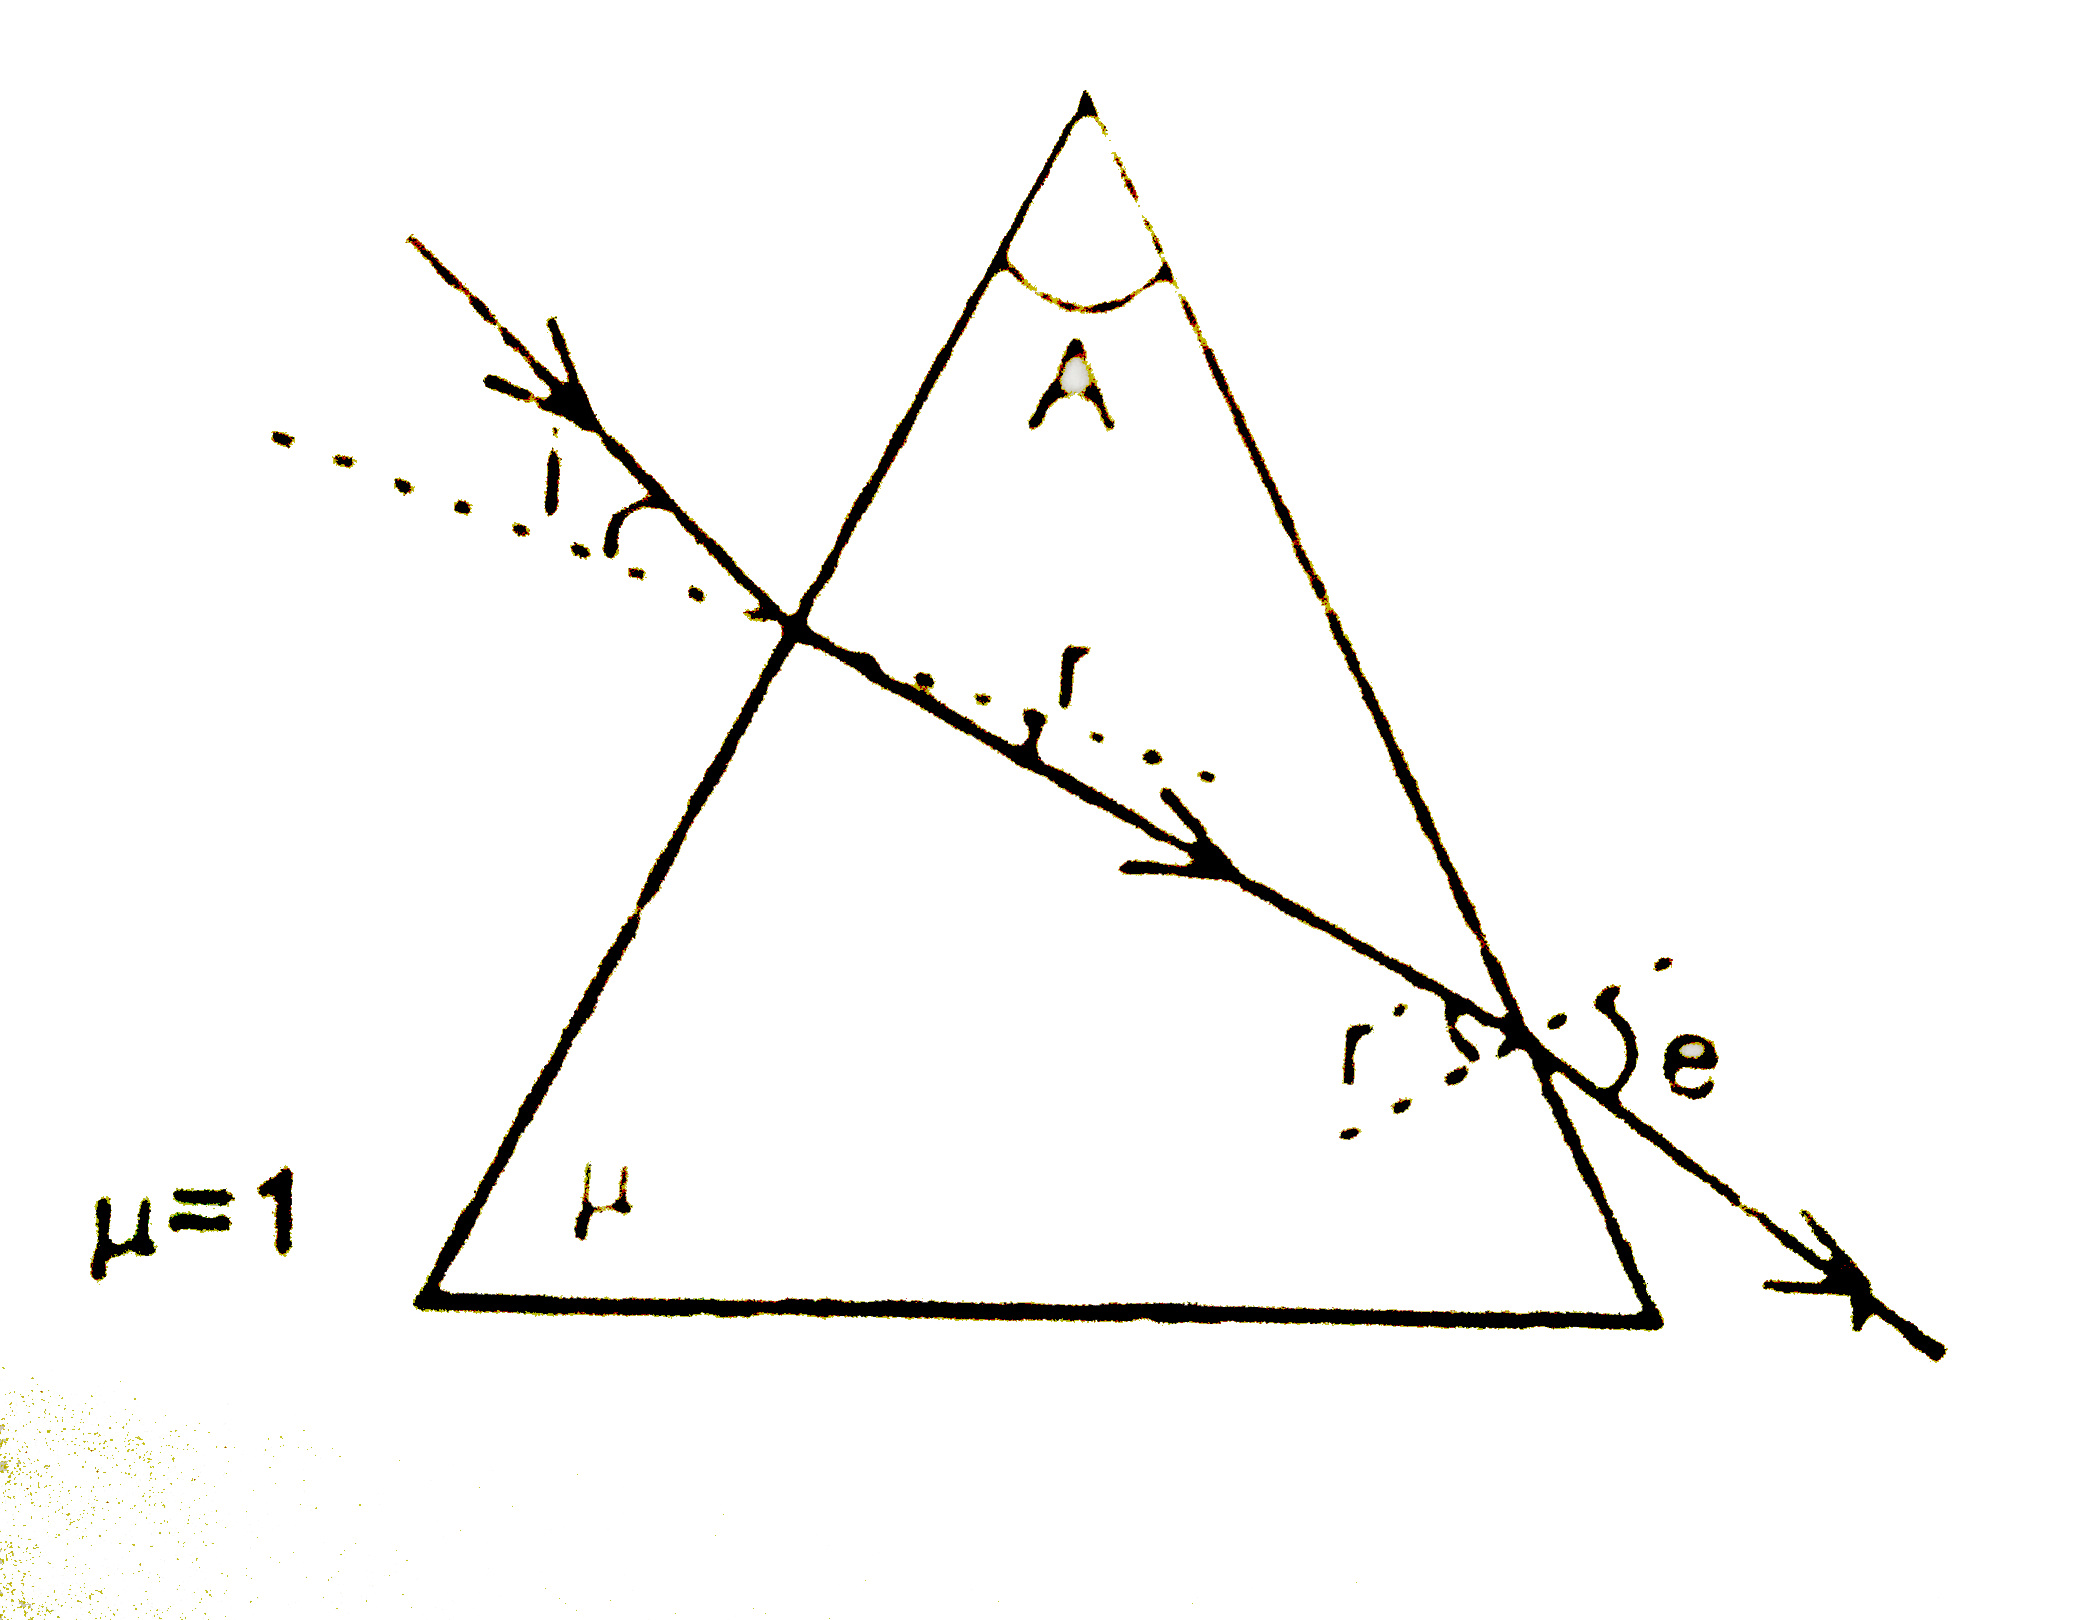 For the case shown in figure  shown in  figure prove the relations r' - r = A and delta = 1 (i-e) + A (do not try tp re,e,ner these  relations  because  the prism  is normally  not used  om this way).